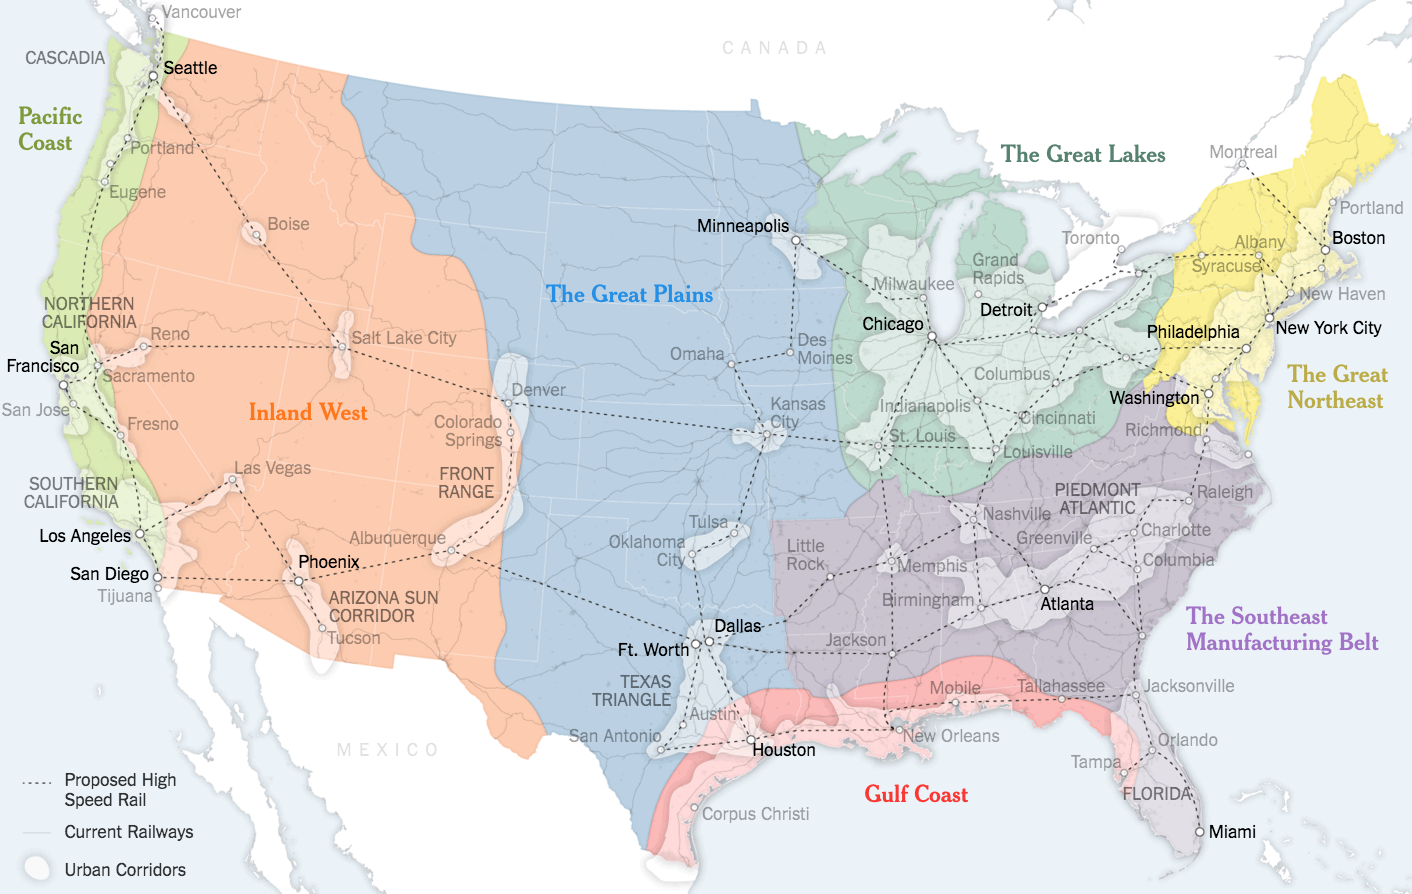 DotEarth NYT Blog Reviews Khanna’s “New Map For America”